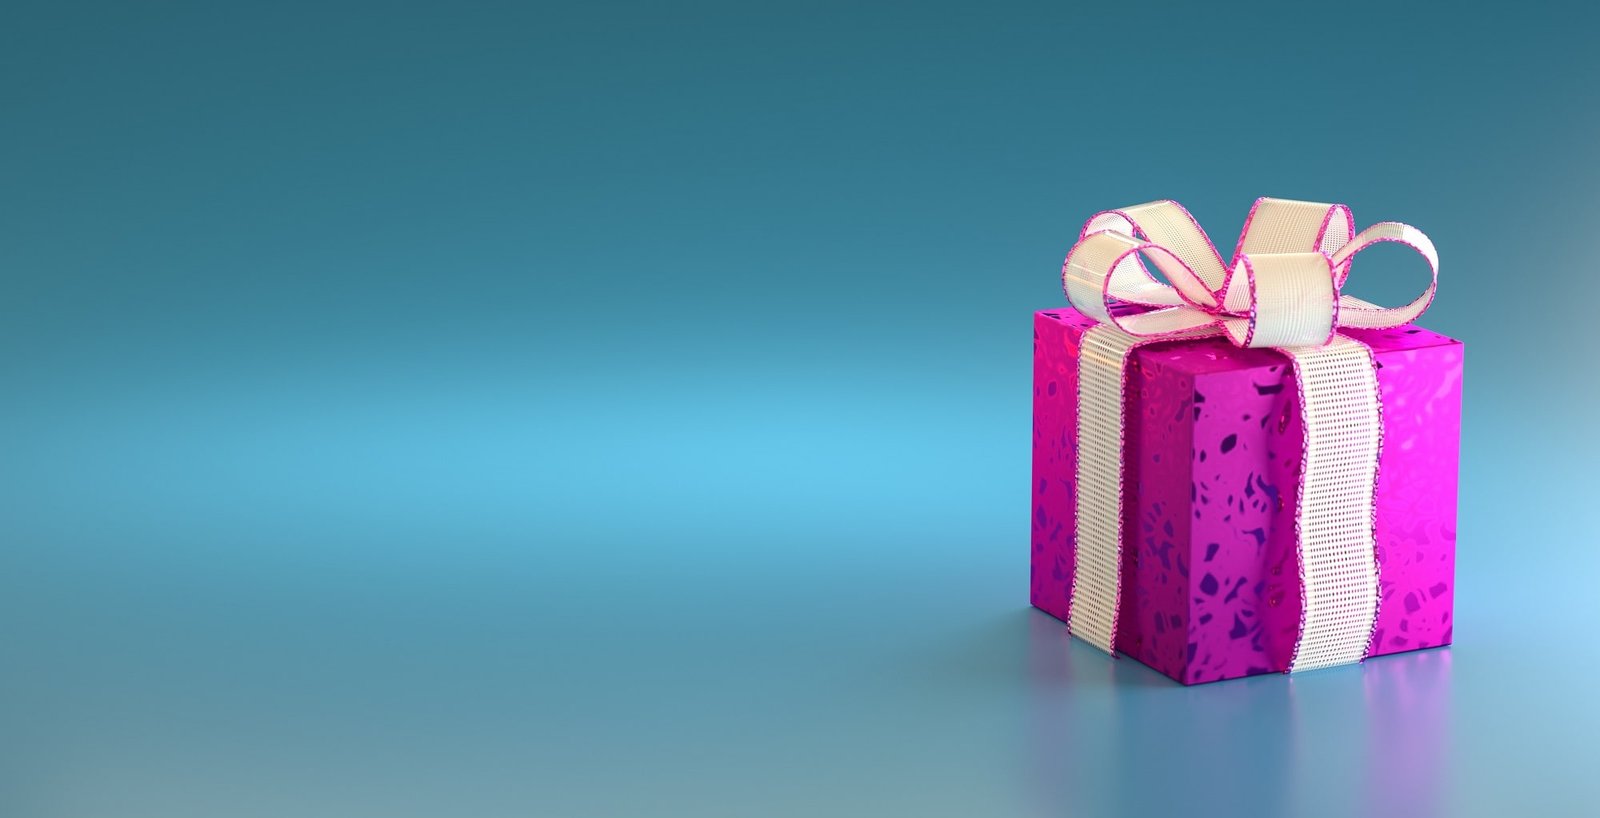 violet-gift-box-with-white-ribbon-blue-background-copy-space-text-min-min